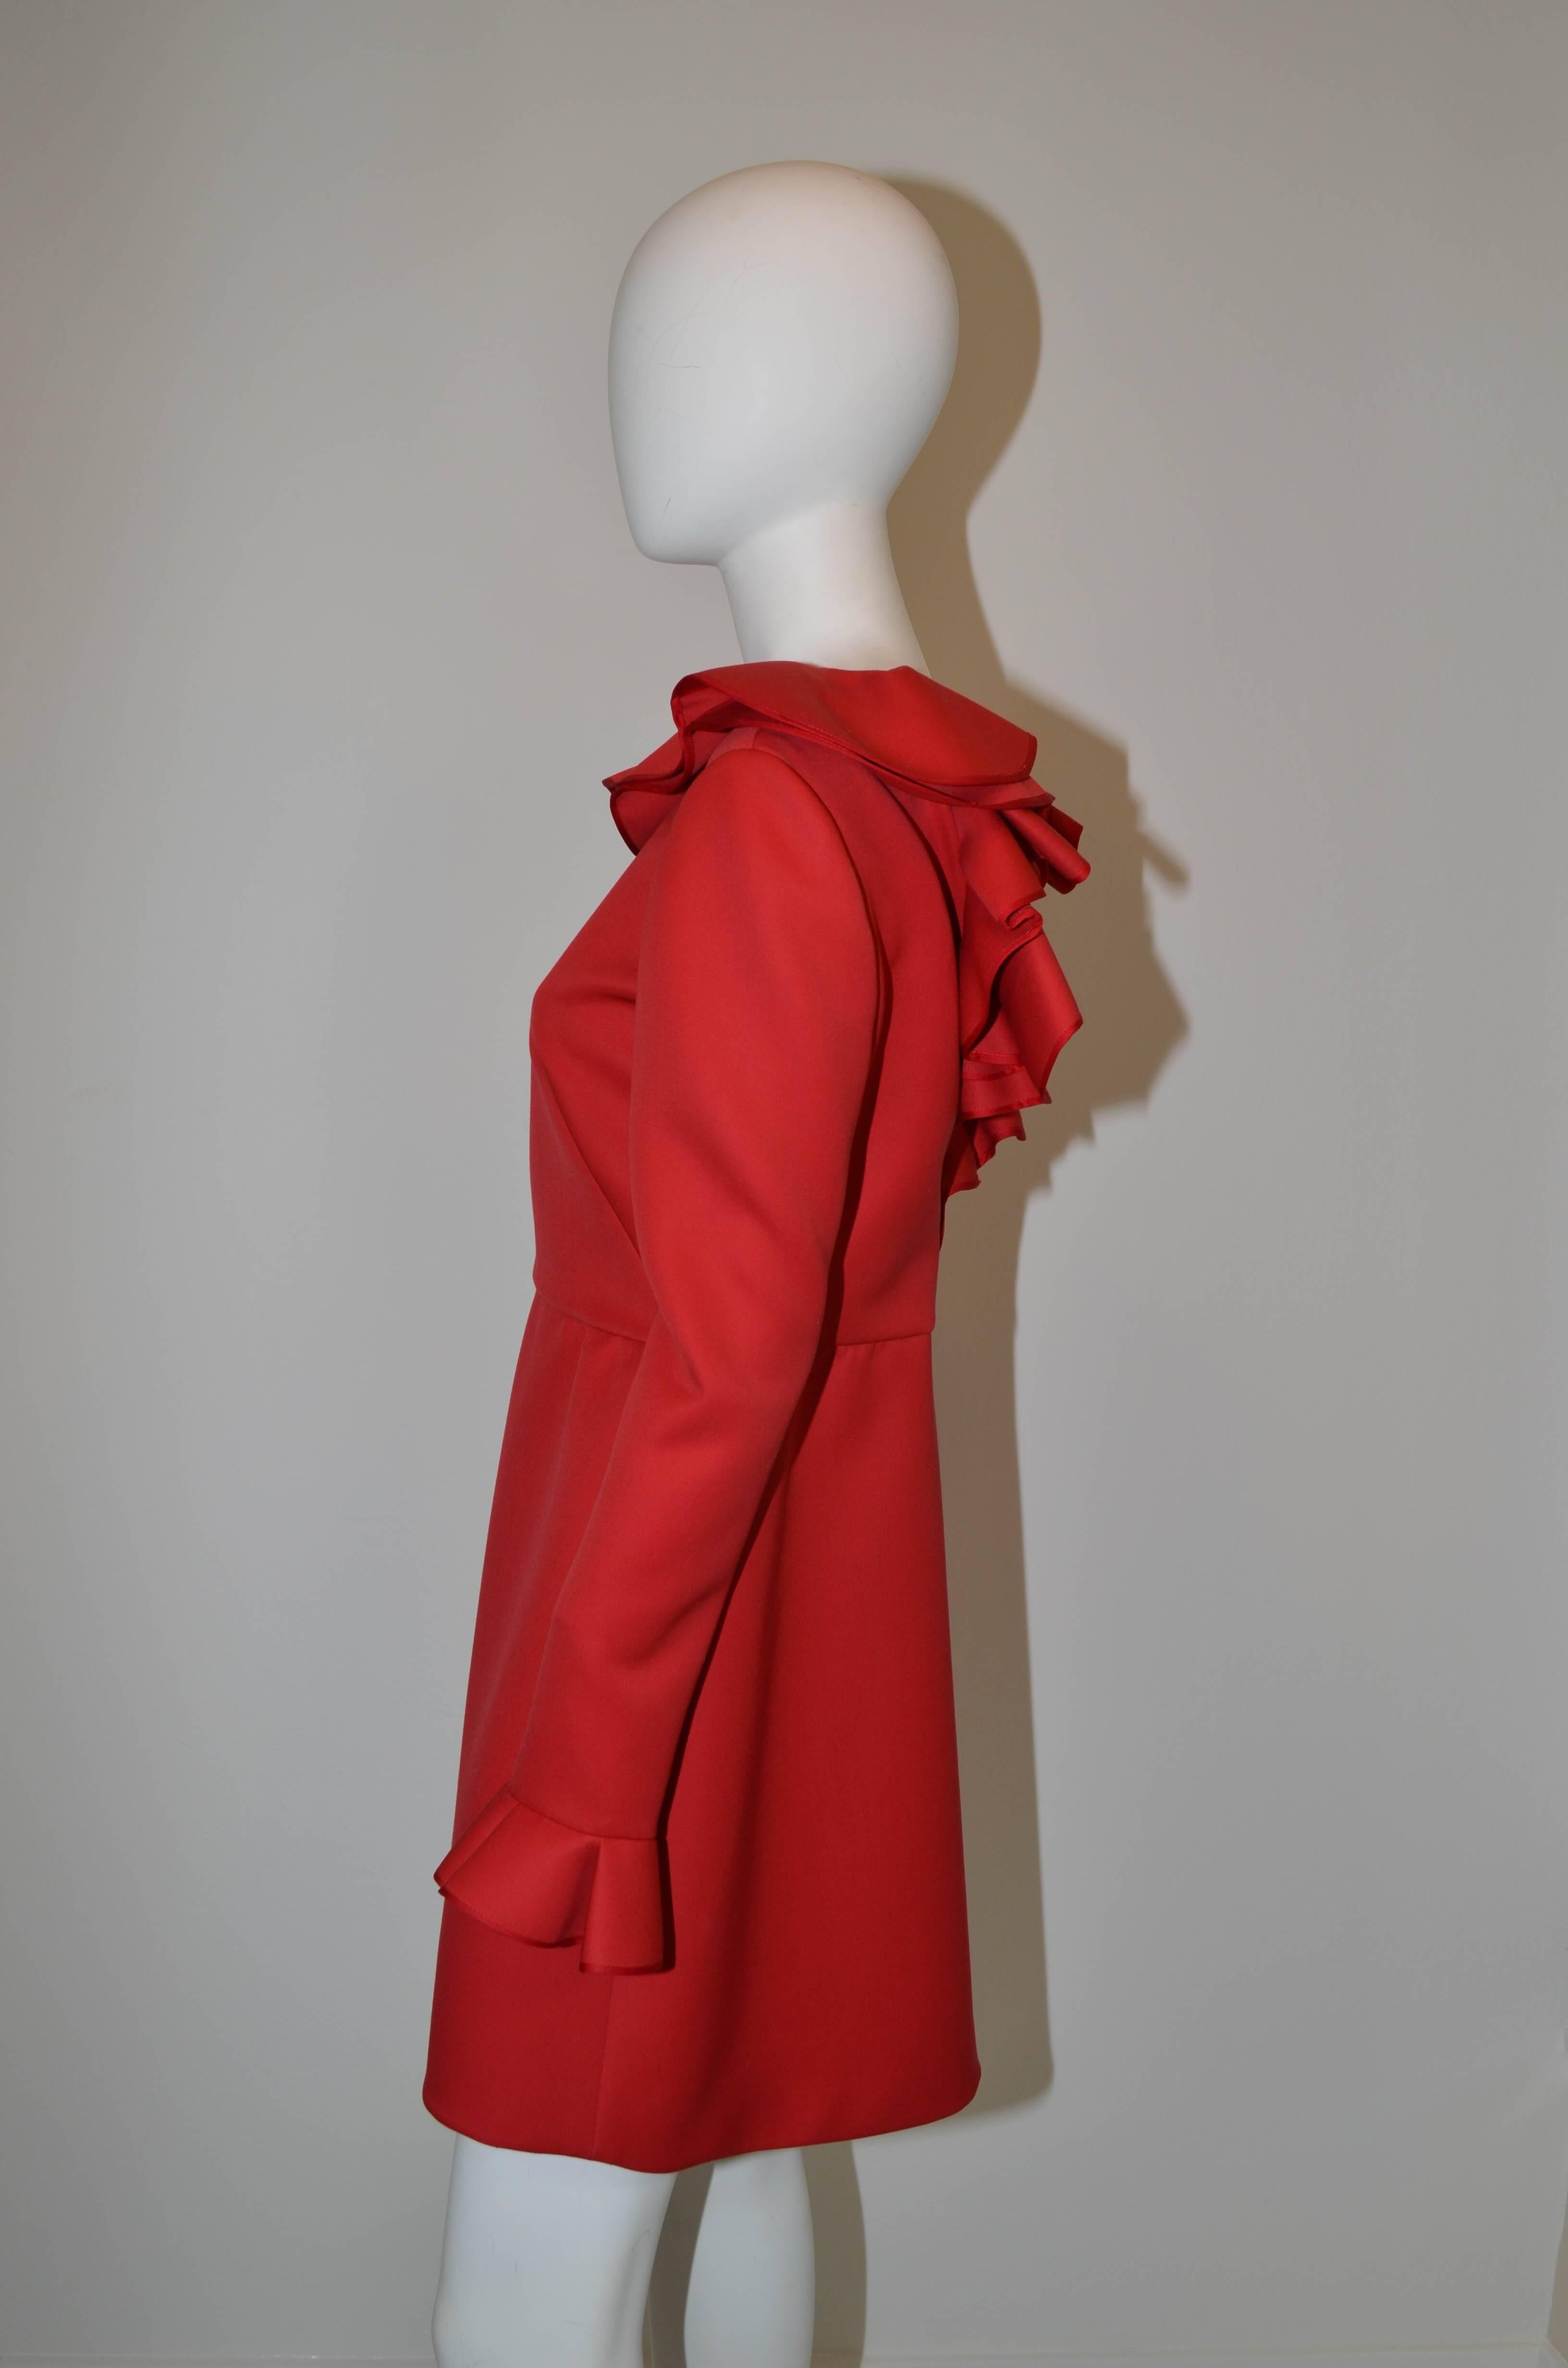 Women's Valentino Wool Dress in Red with Ruffle